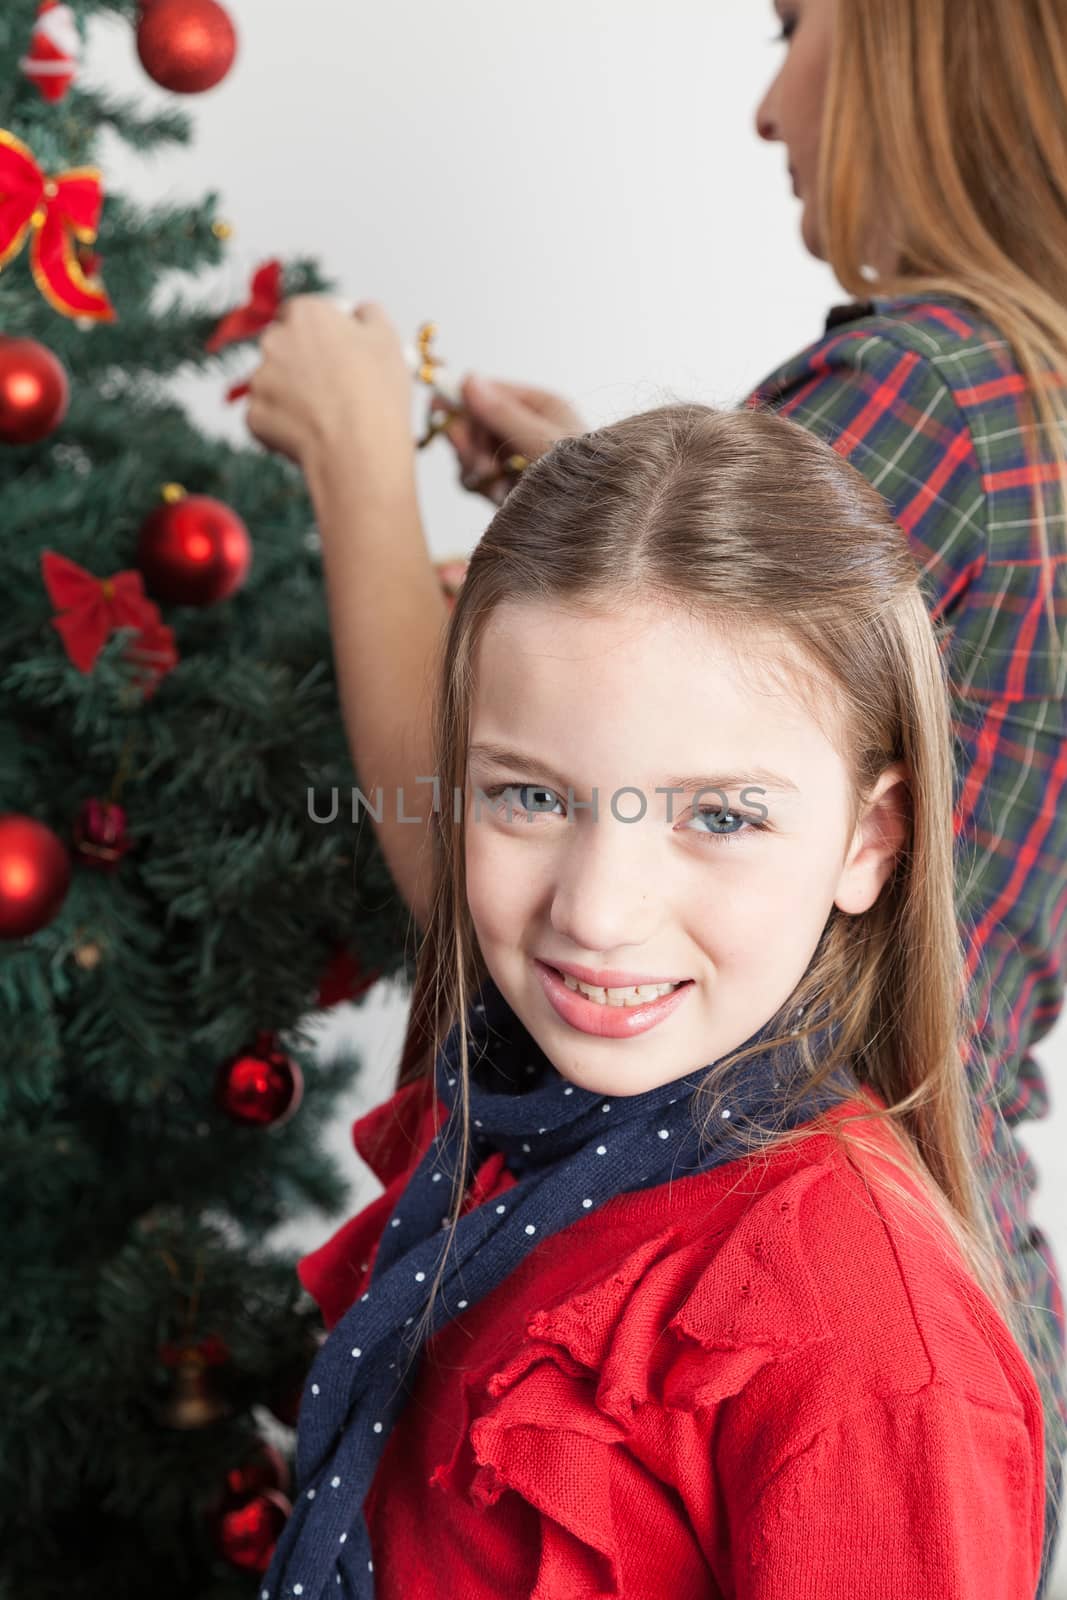 8-10, at, beautiful, blonde, blue, camera, caucasian, celebration, christmas, cute, december, event, eyes, girl, green, happy, holiday, look, looking, merry, model, new, old, people, person, portrait, pretty, property, pullover, red, releases, smile, tradition, traditional, vertical, winter, xmas, year, years, young